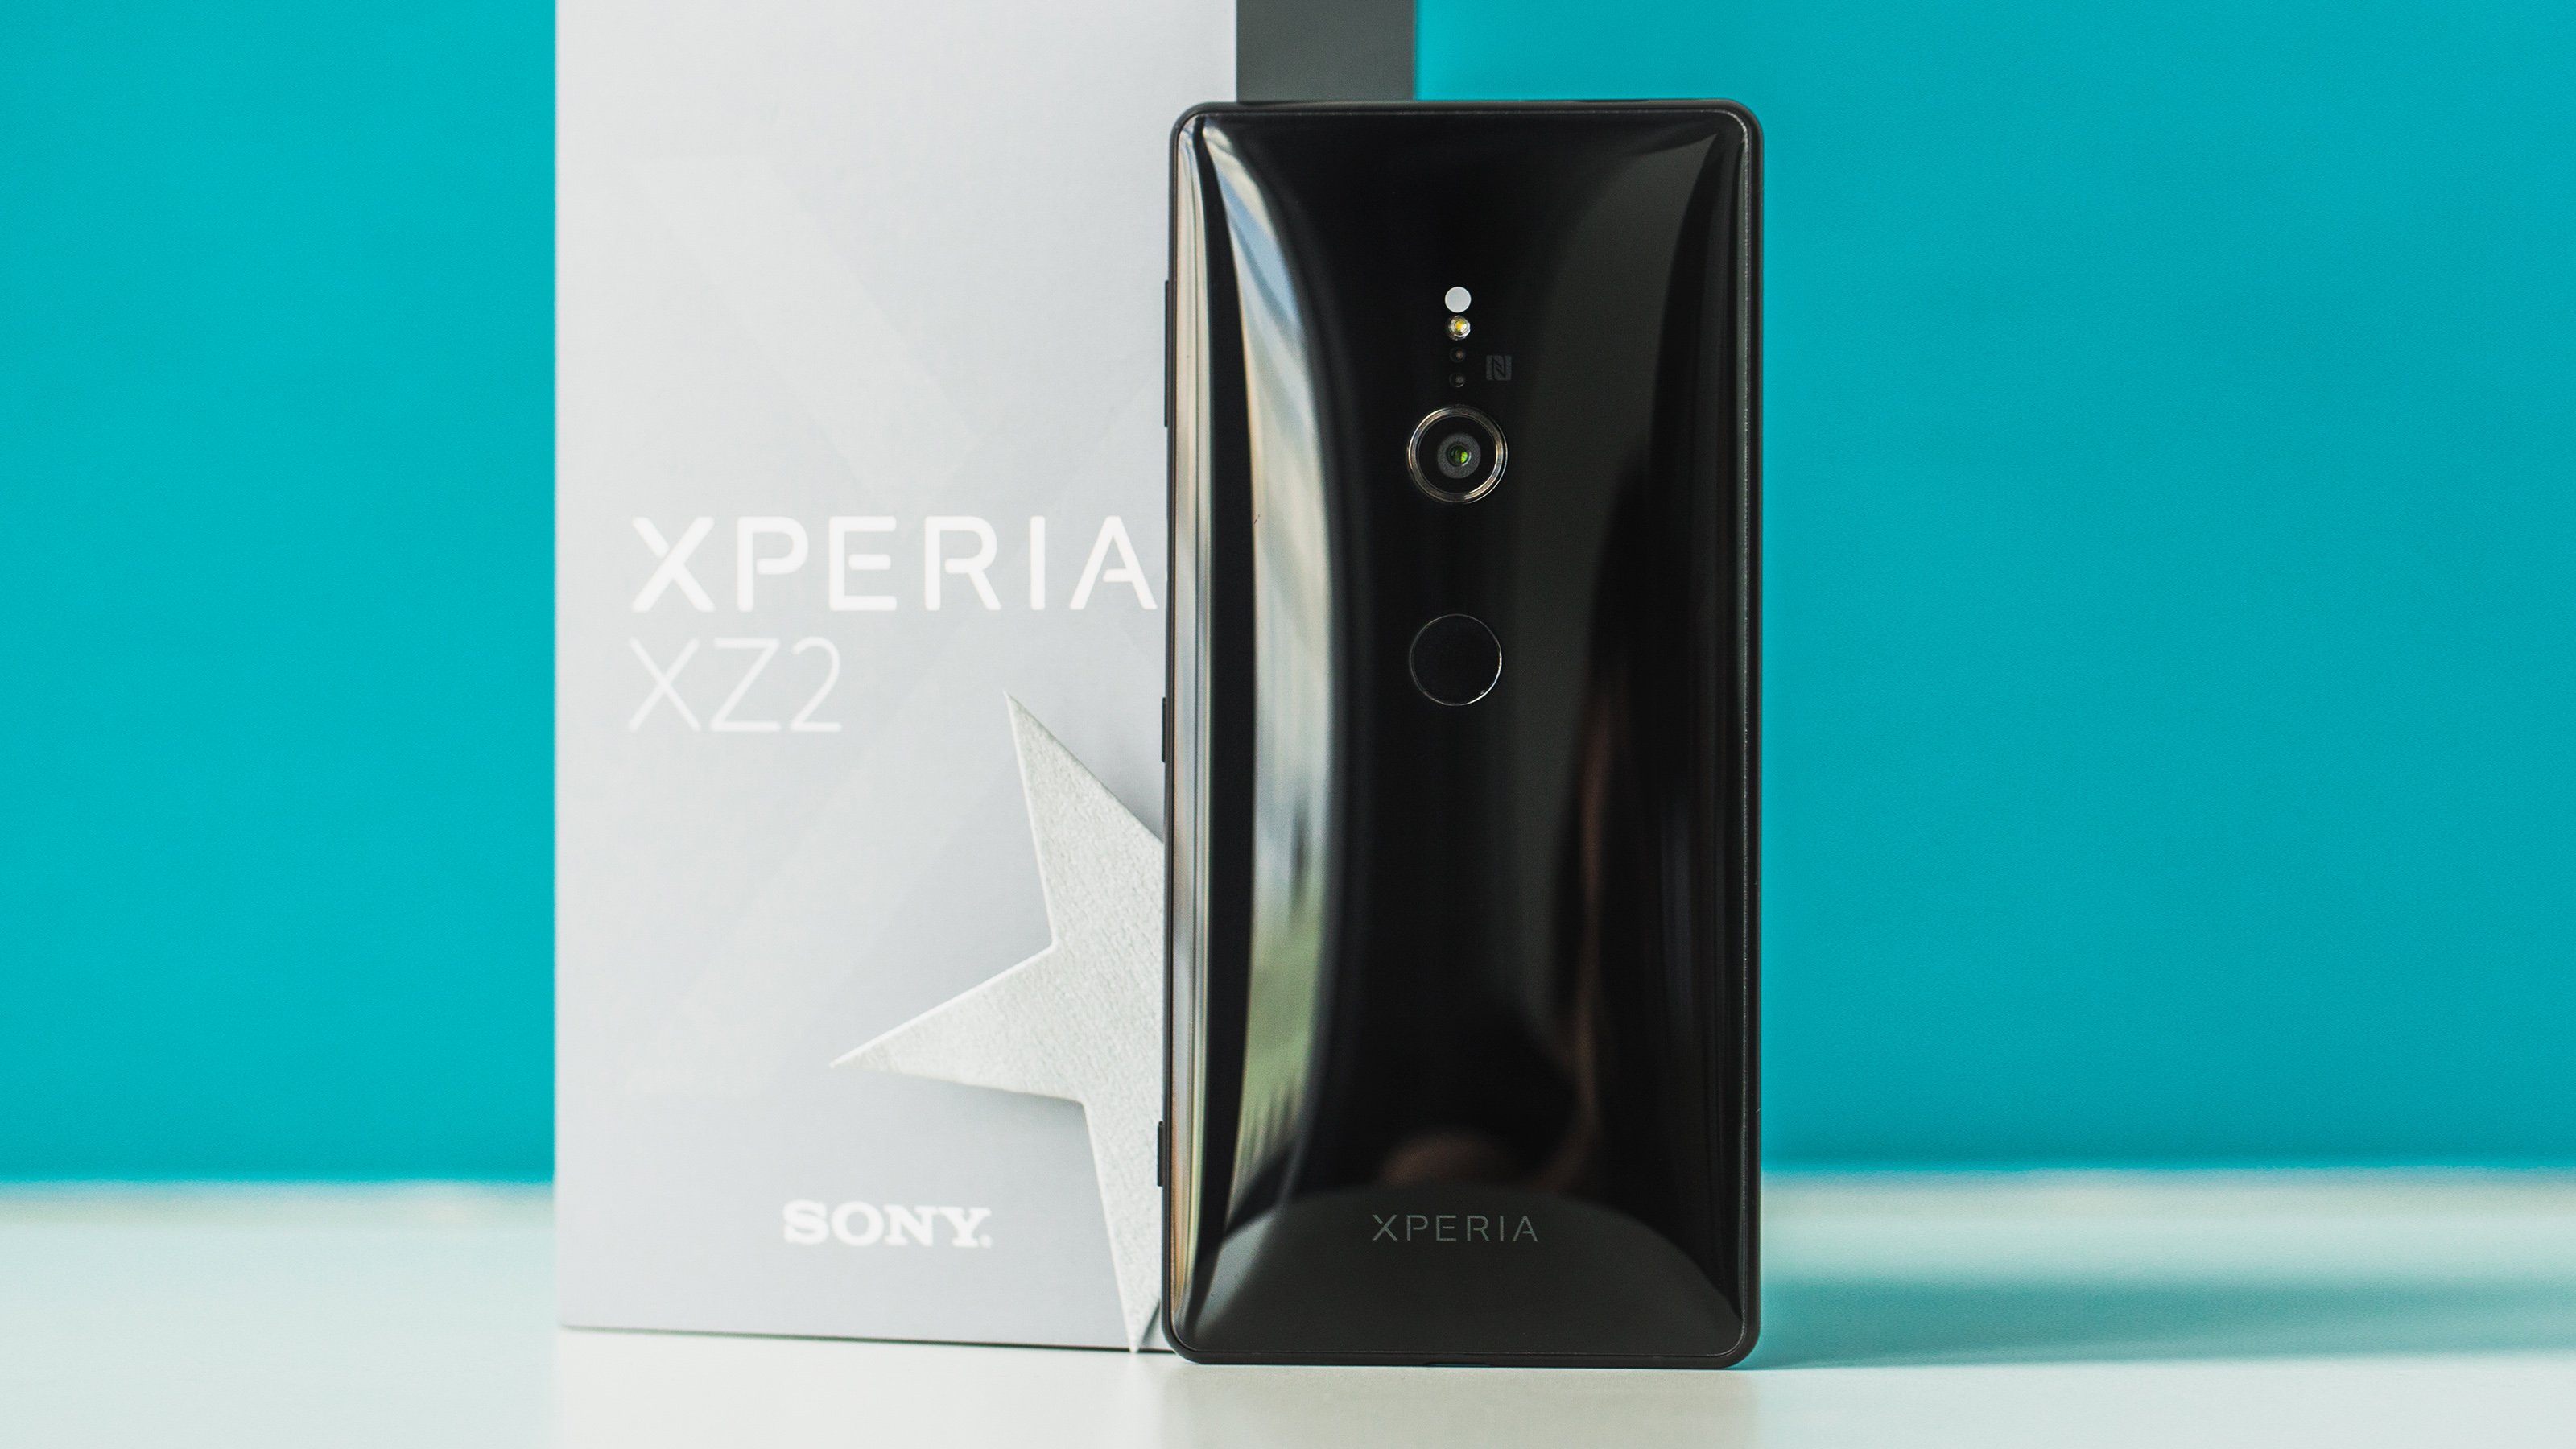 Sony Xperia XZ2: Benchmarks tell only half the story | NextPit